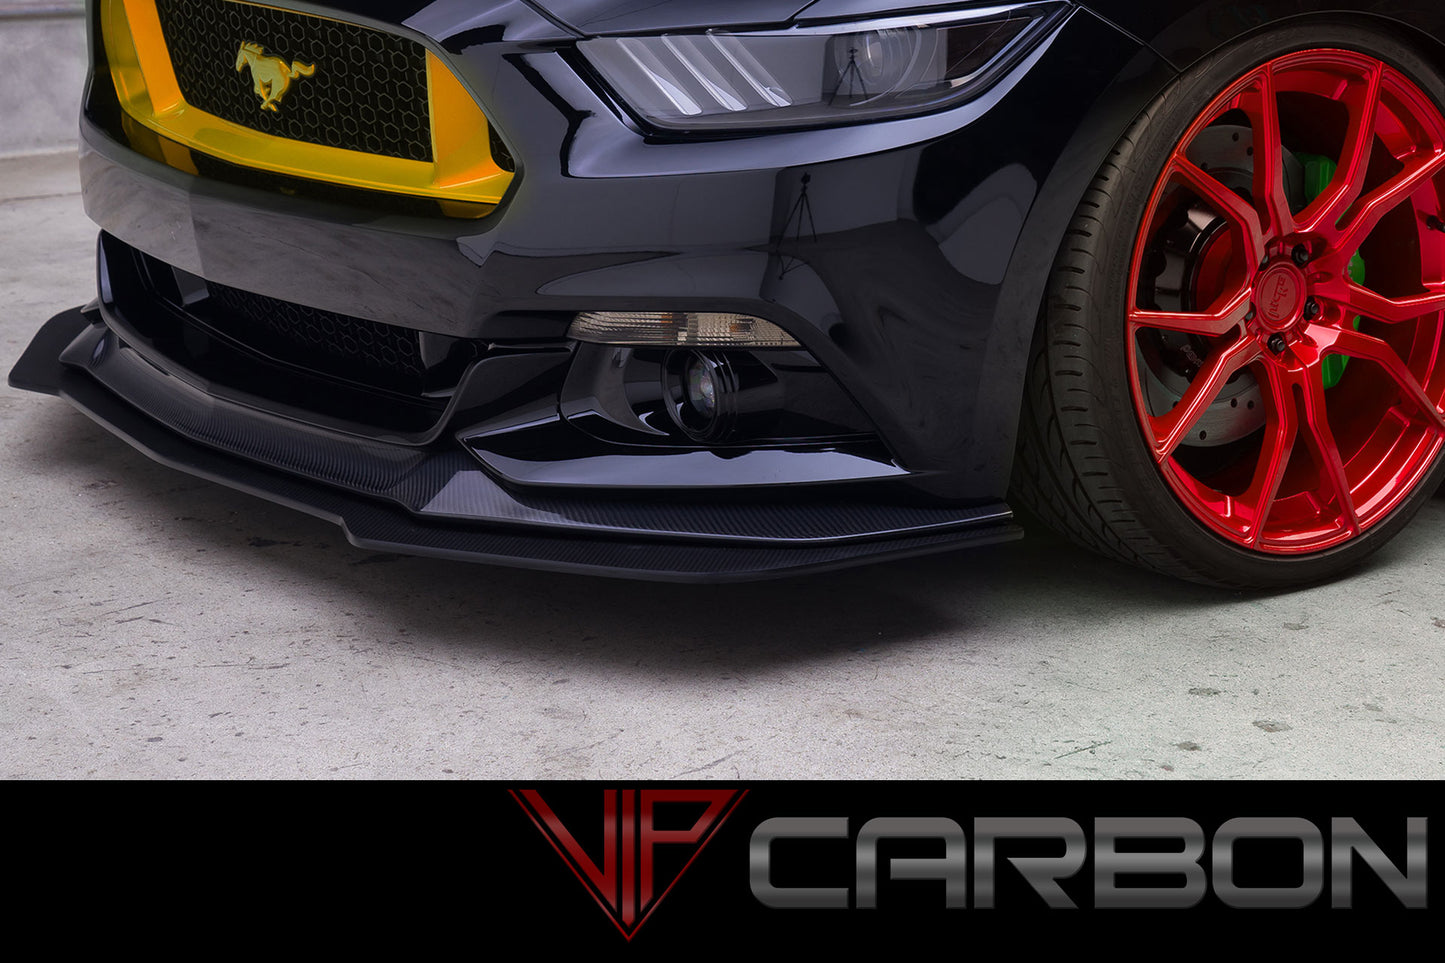 Carbon Fiber GT Concept Front Air Dam Ford Mustang 2015-2018 by VIP